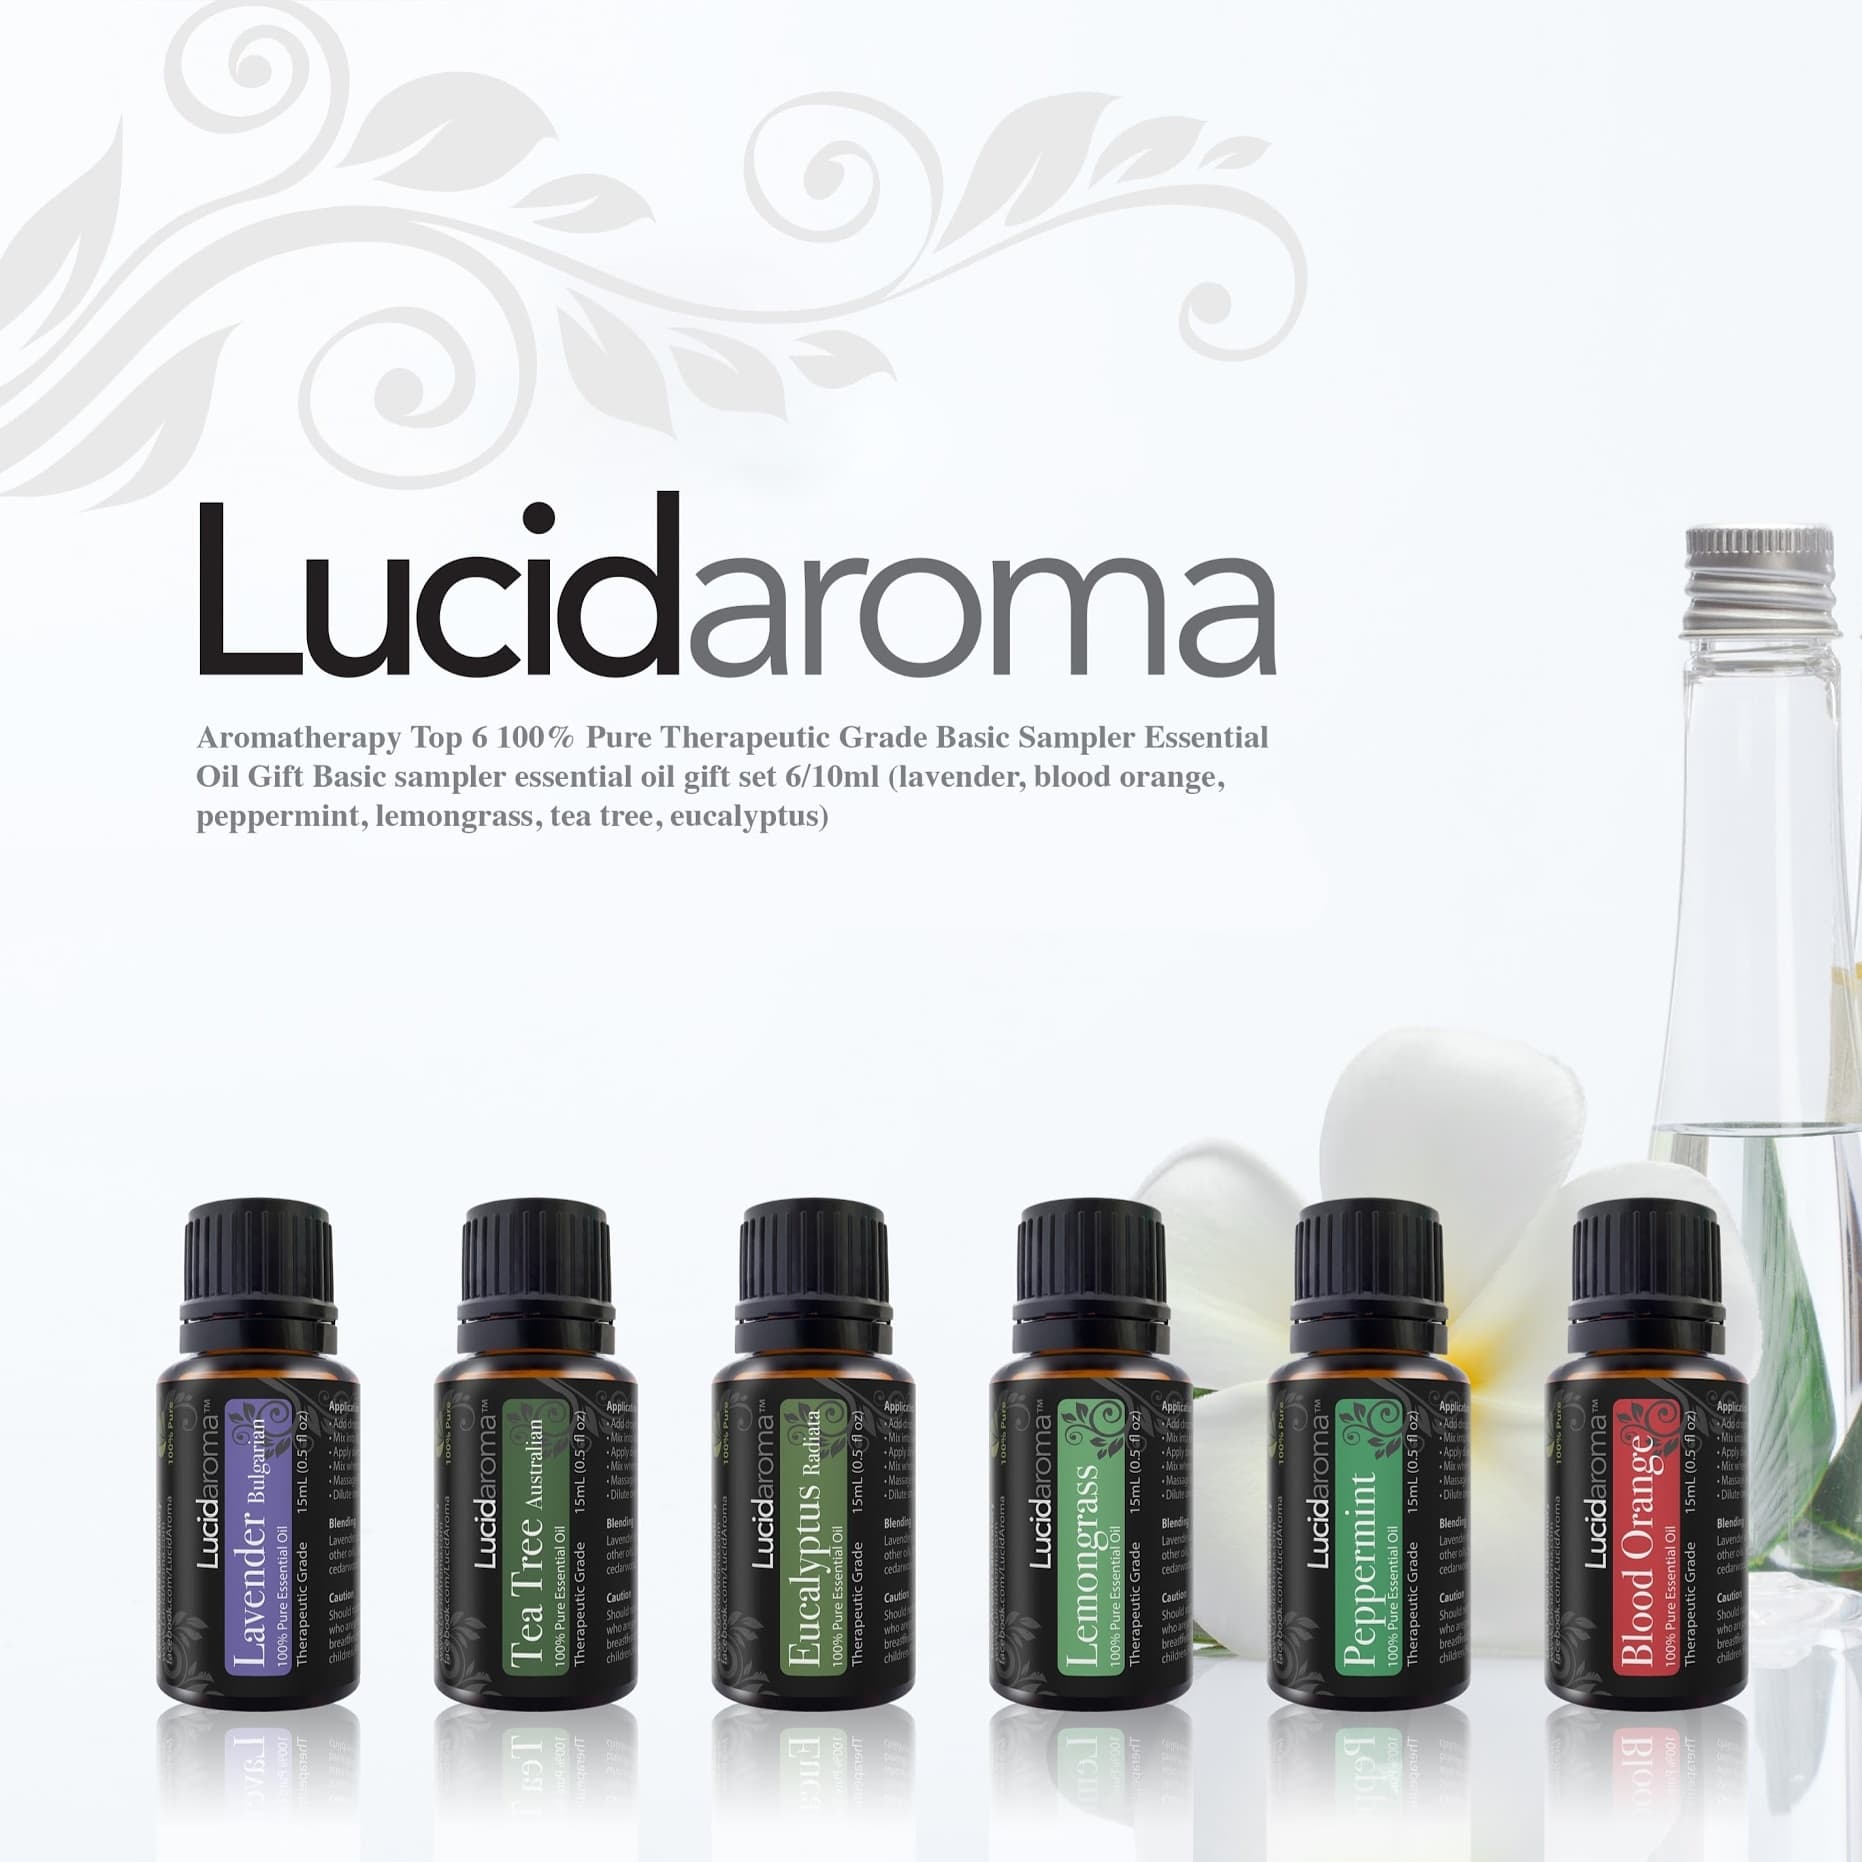 Lucid Aroma collection